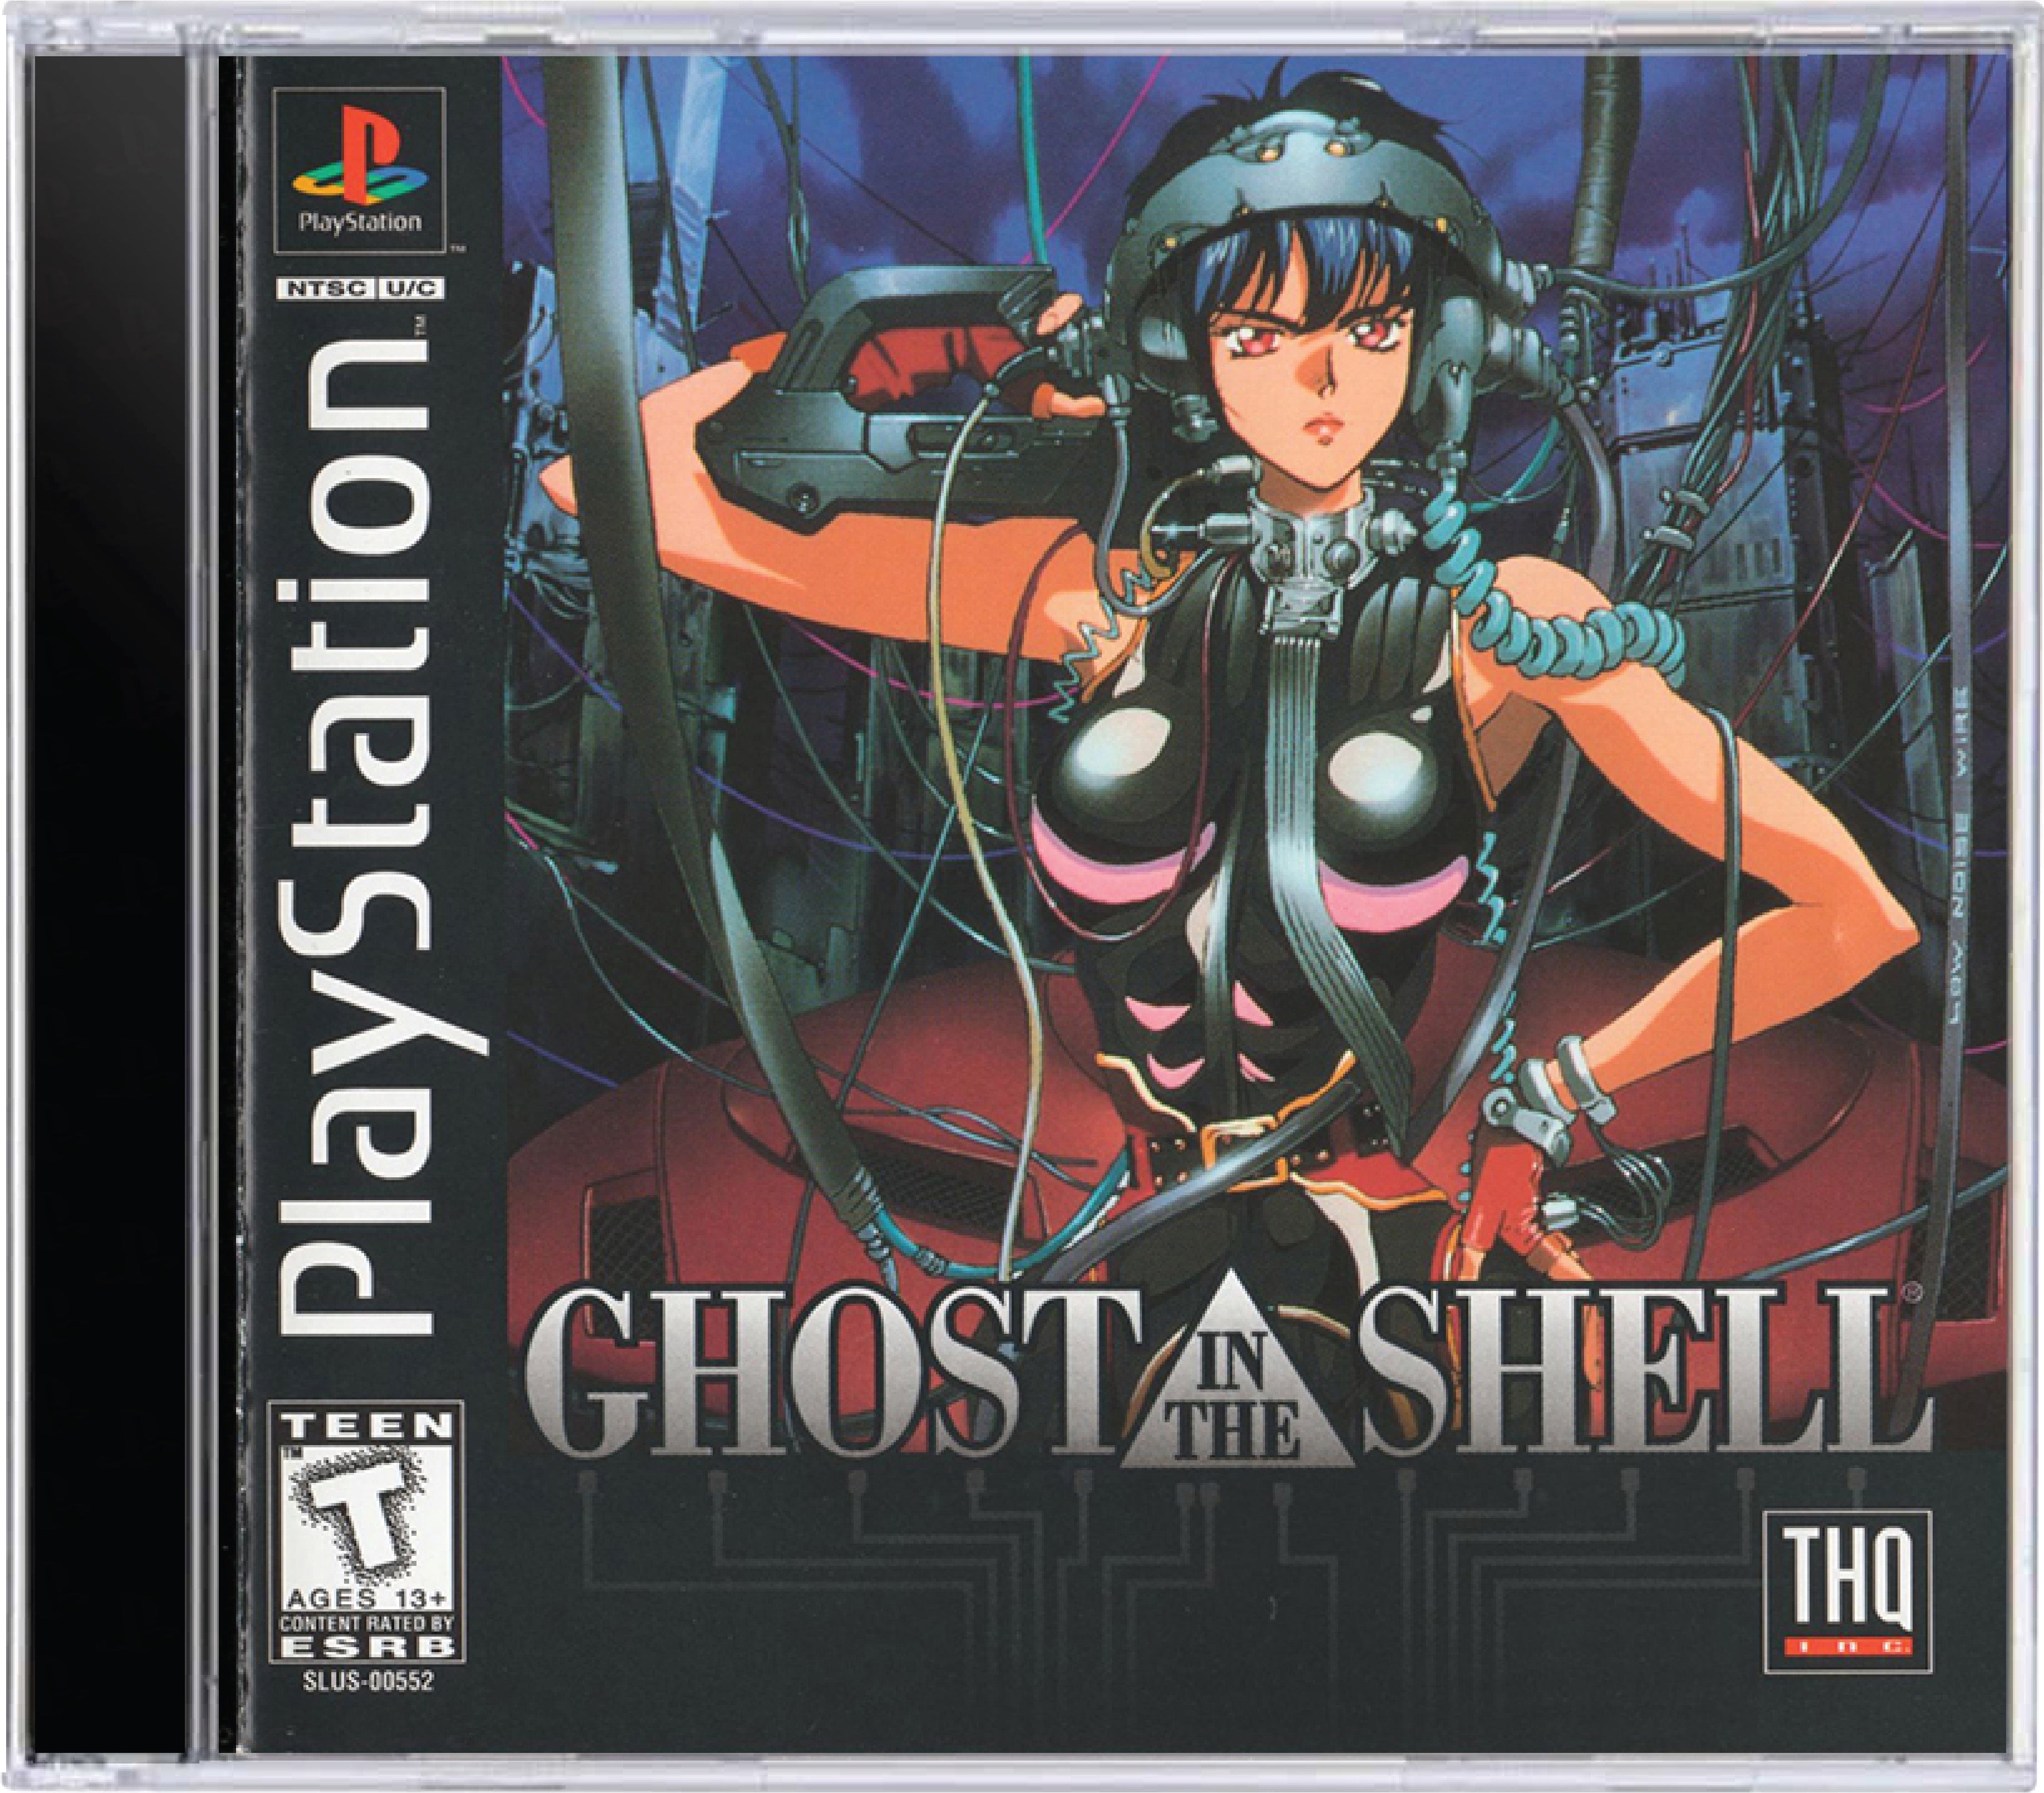 Ghost in the Shell Cover Art and Product Photo